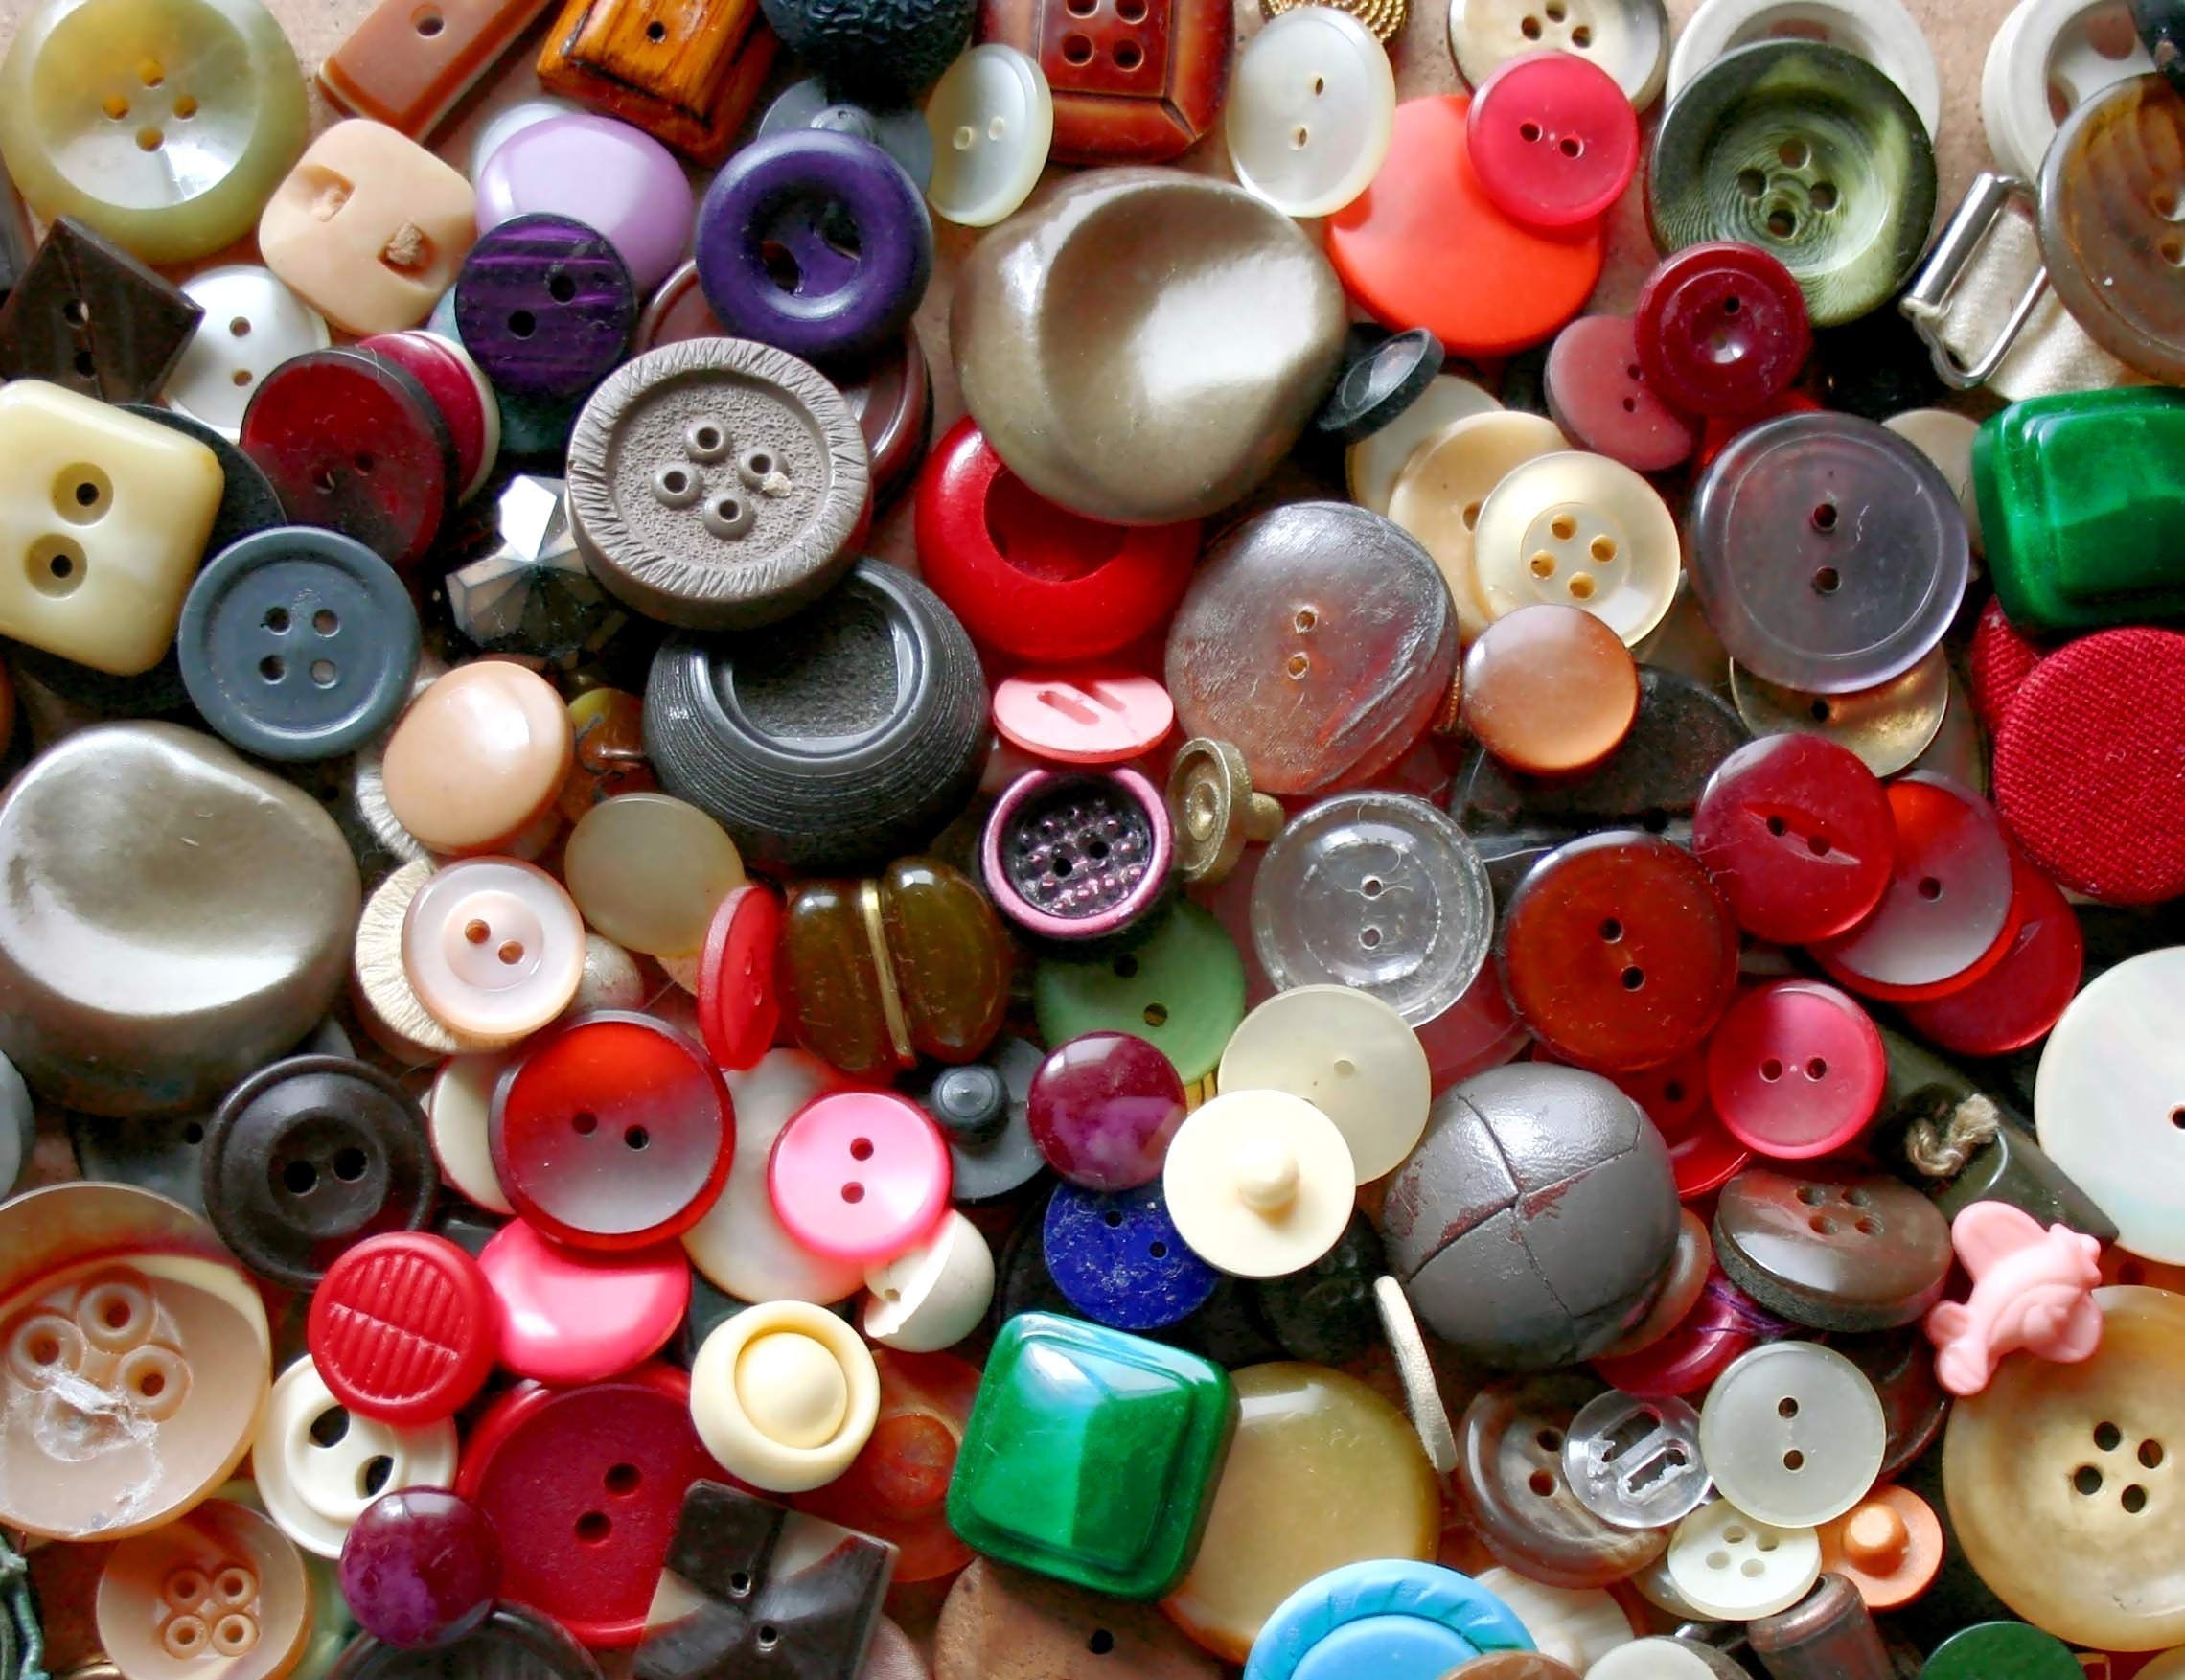 Man Made Button HD Wallpaper | Background Image